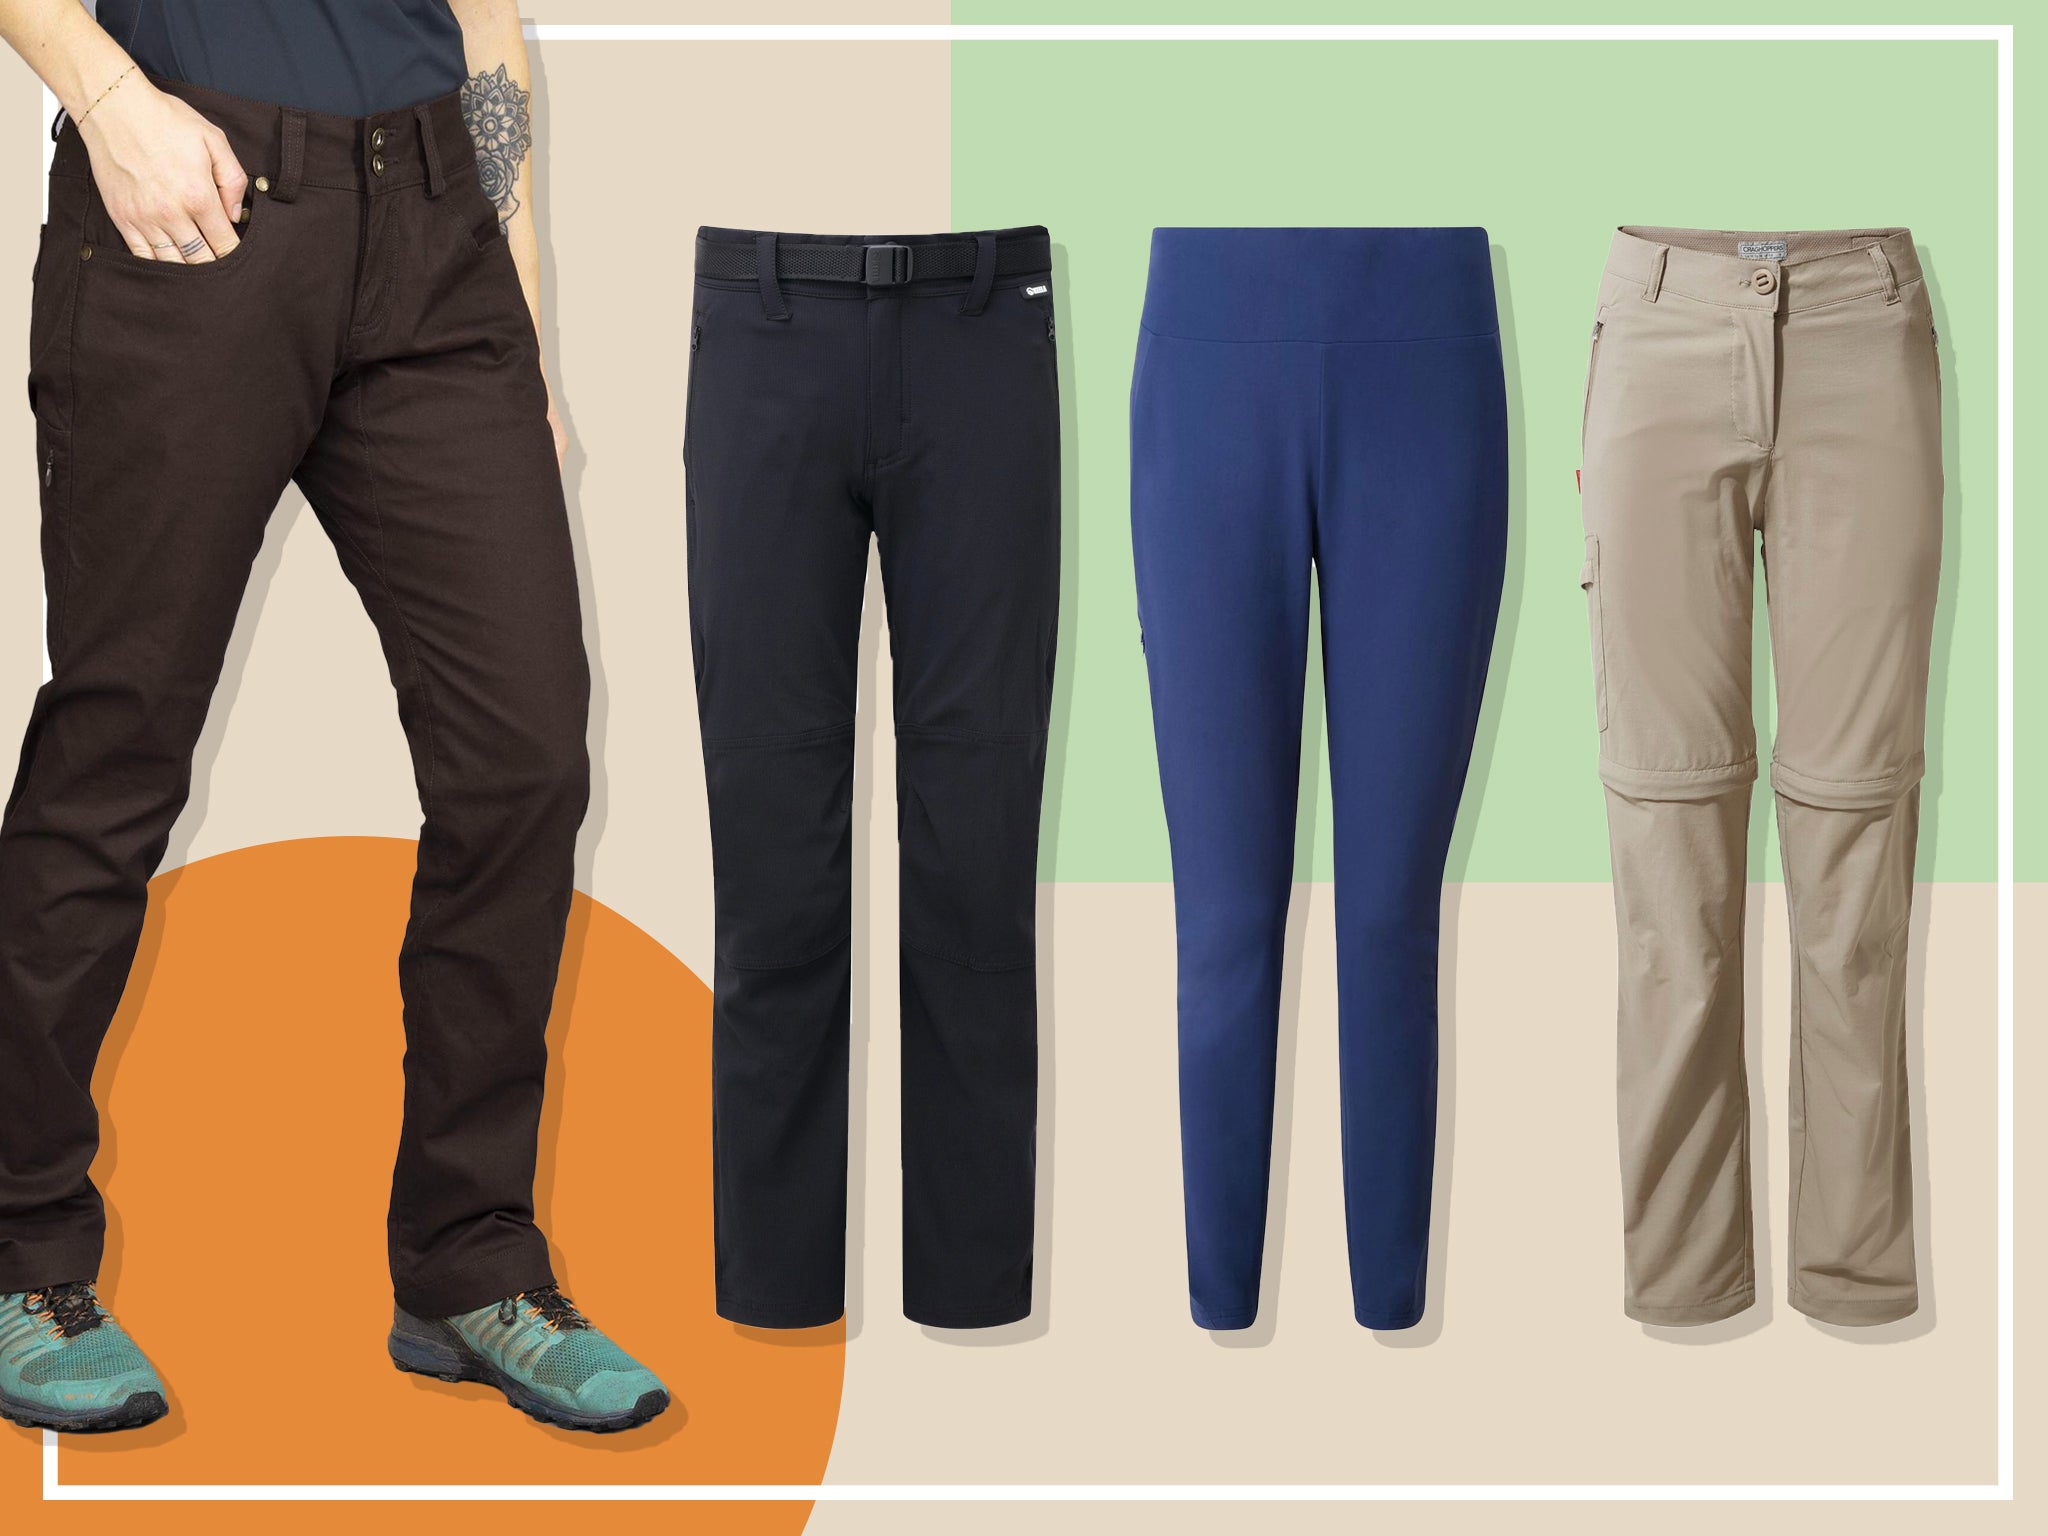 Share 125+ types of trousers